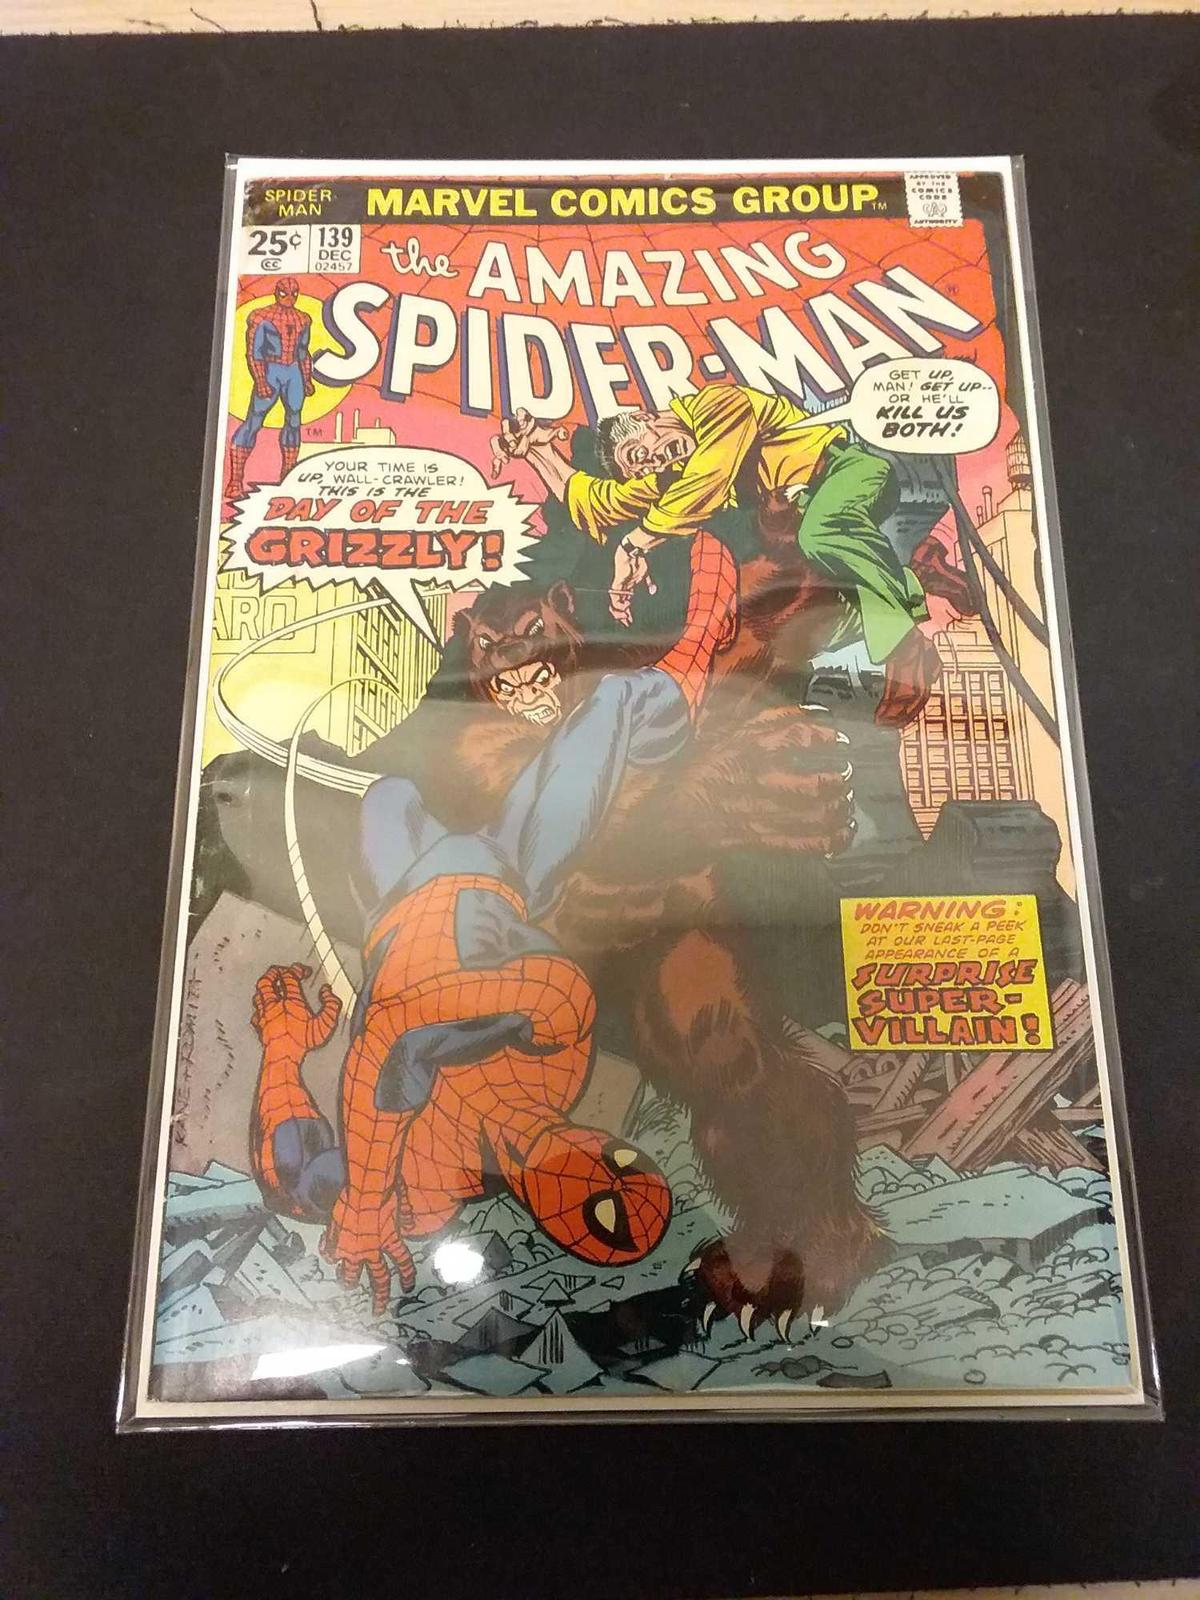 The Amazing Spider-Man #139 Comic Book from Estate Collection